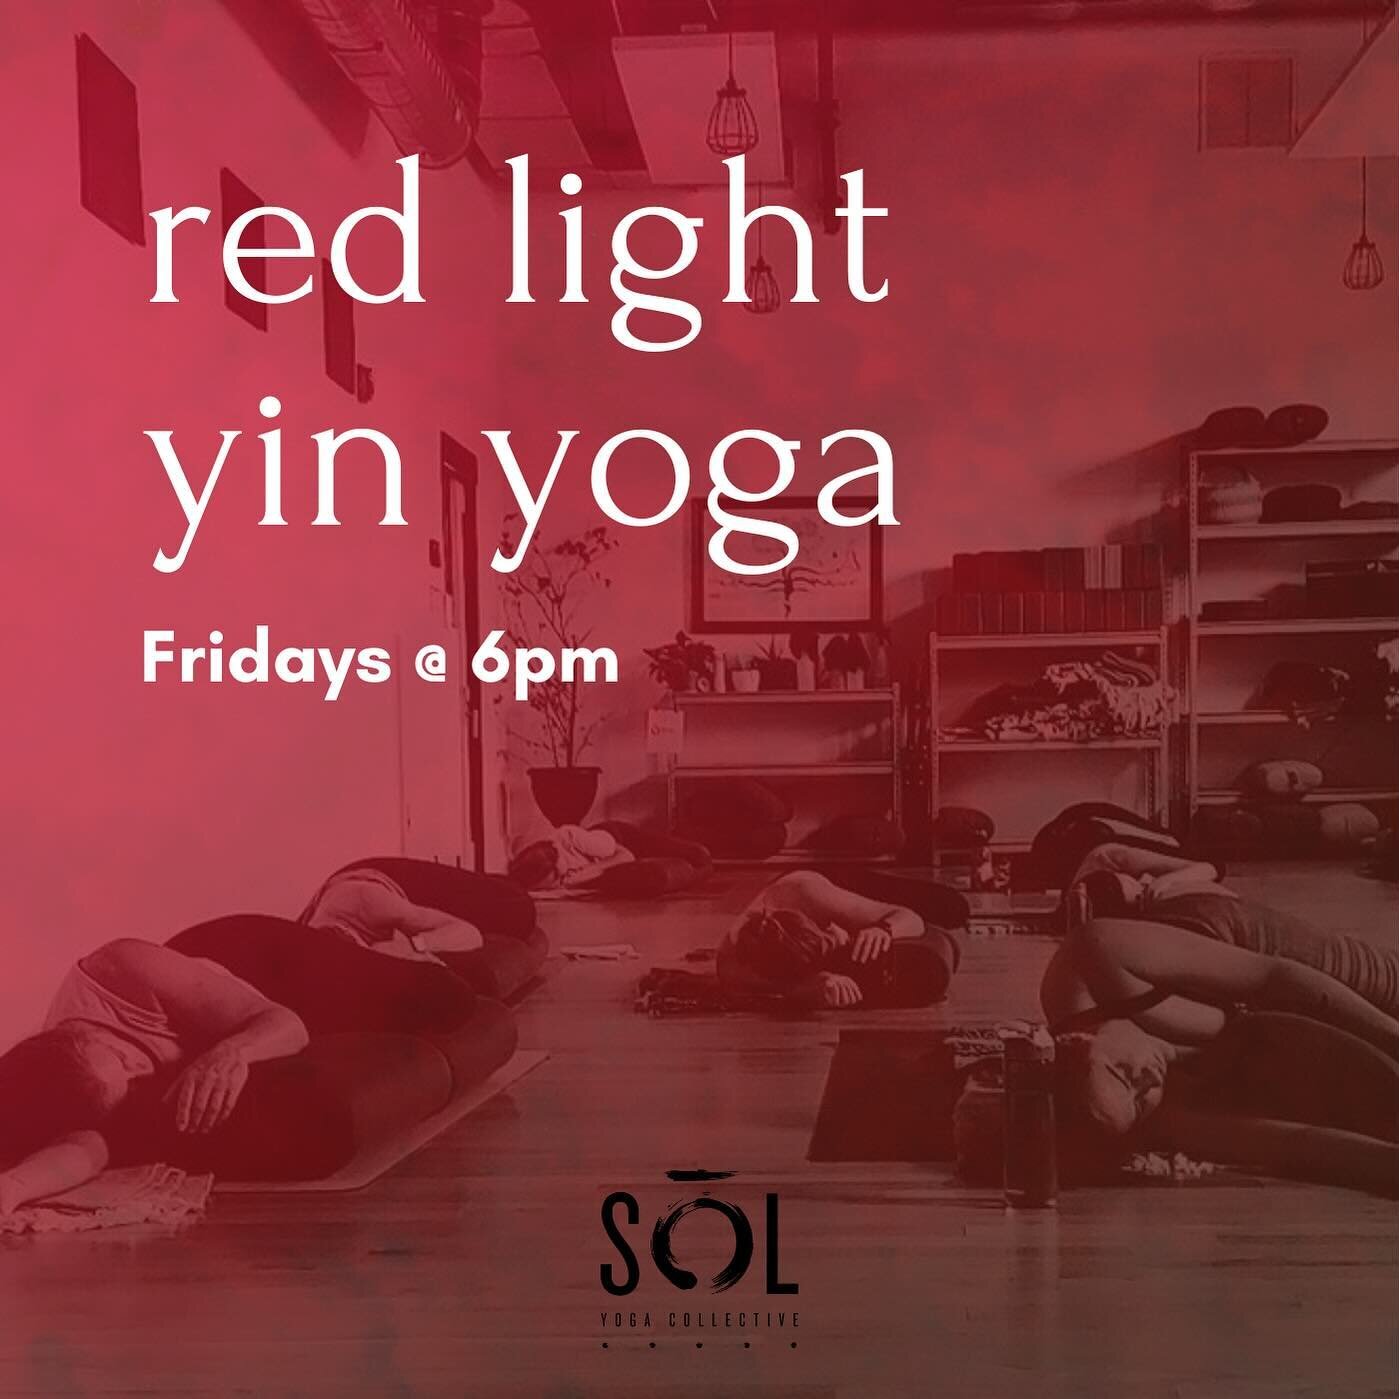 Friday night Yin is bringing in the red lights! End your work week right 🧡